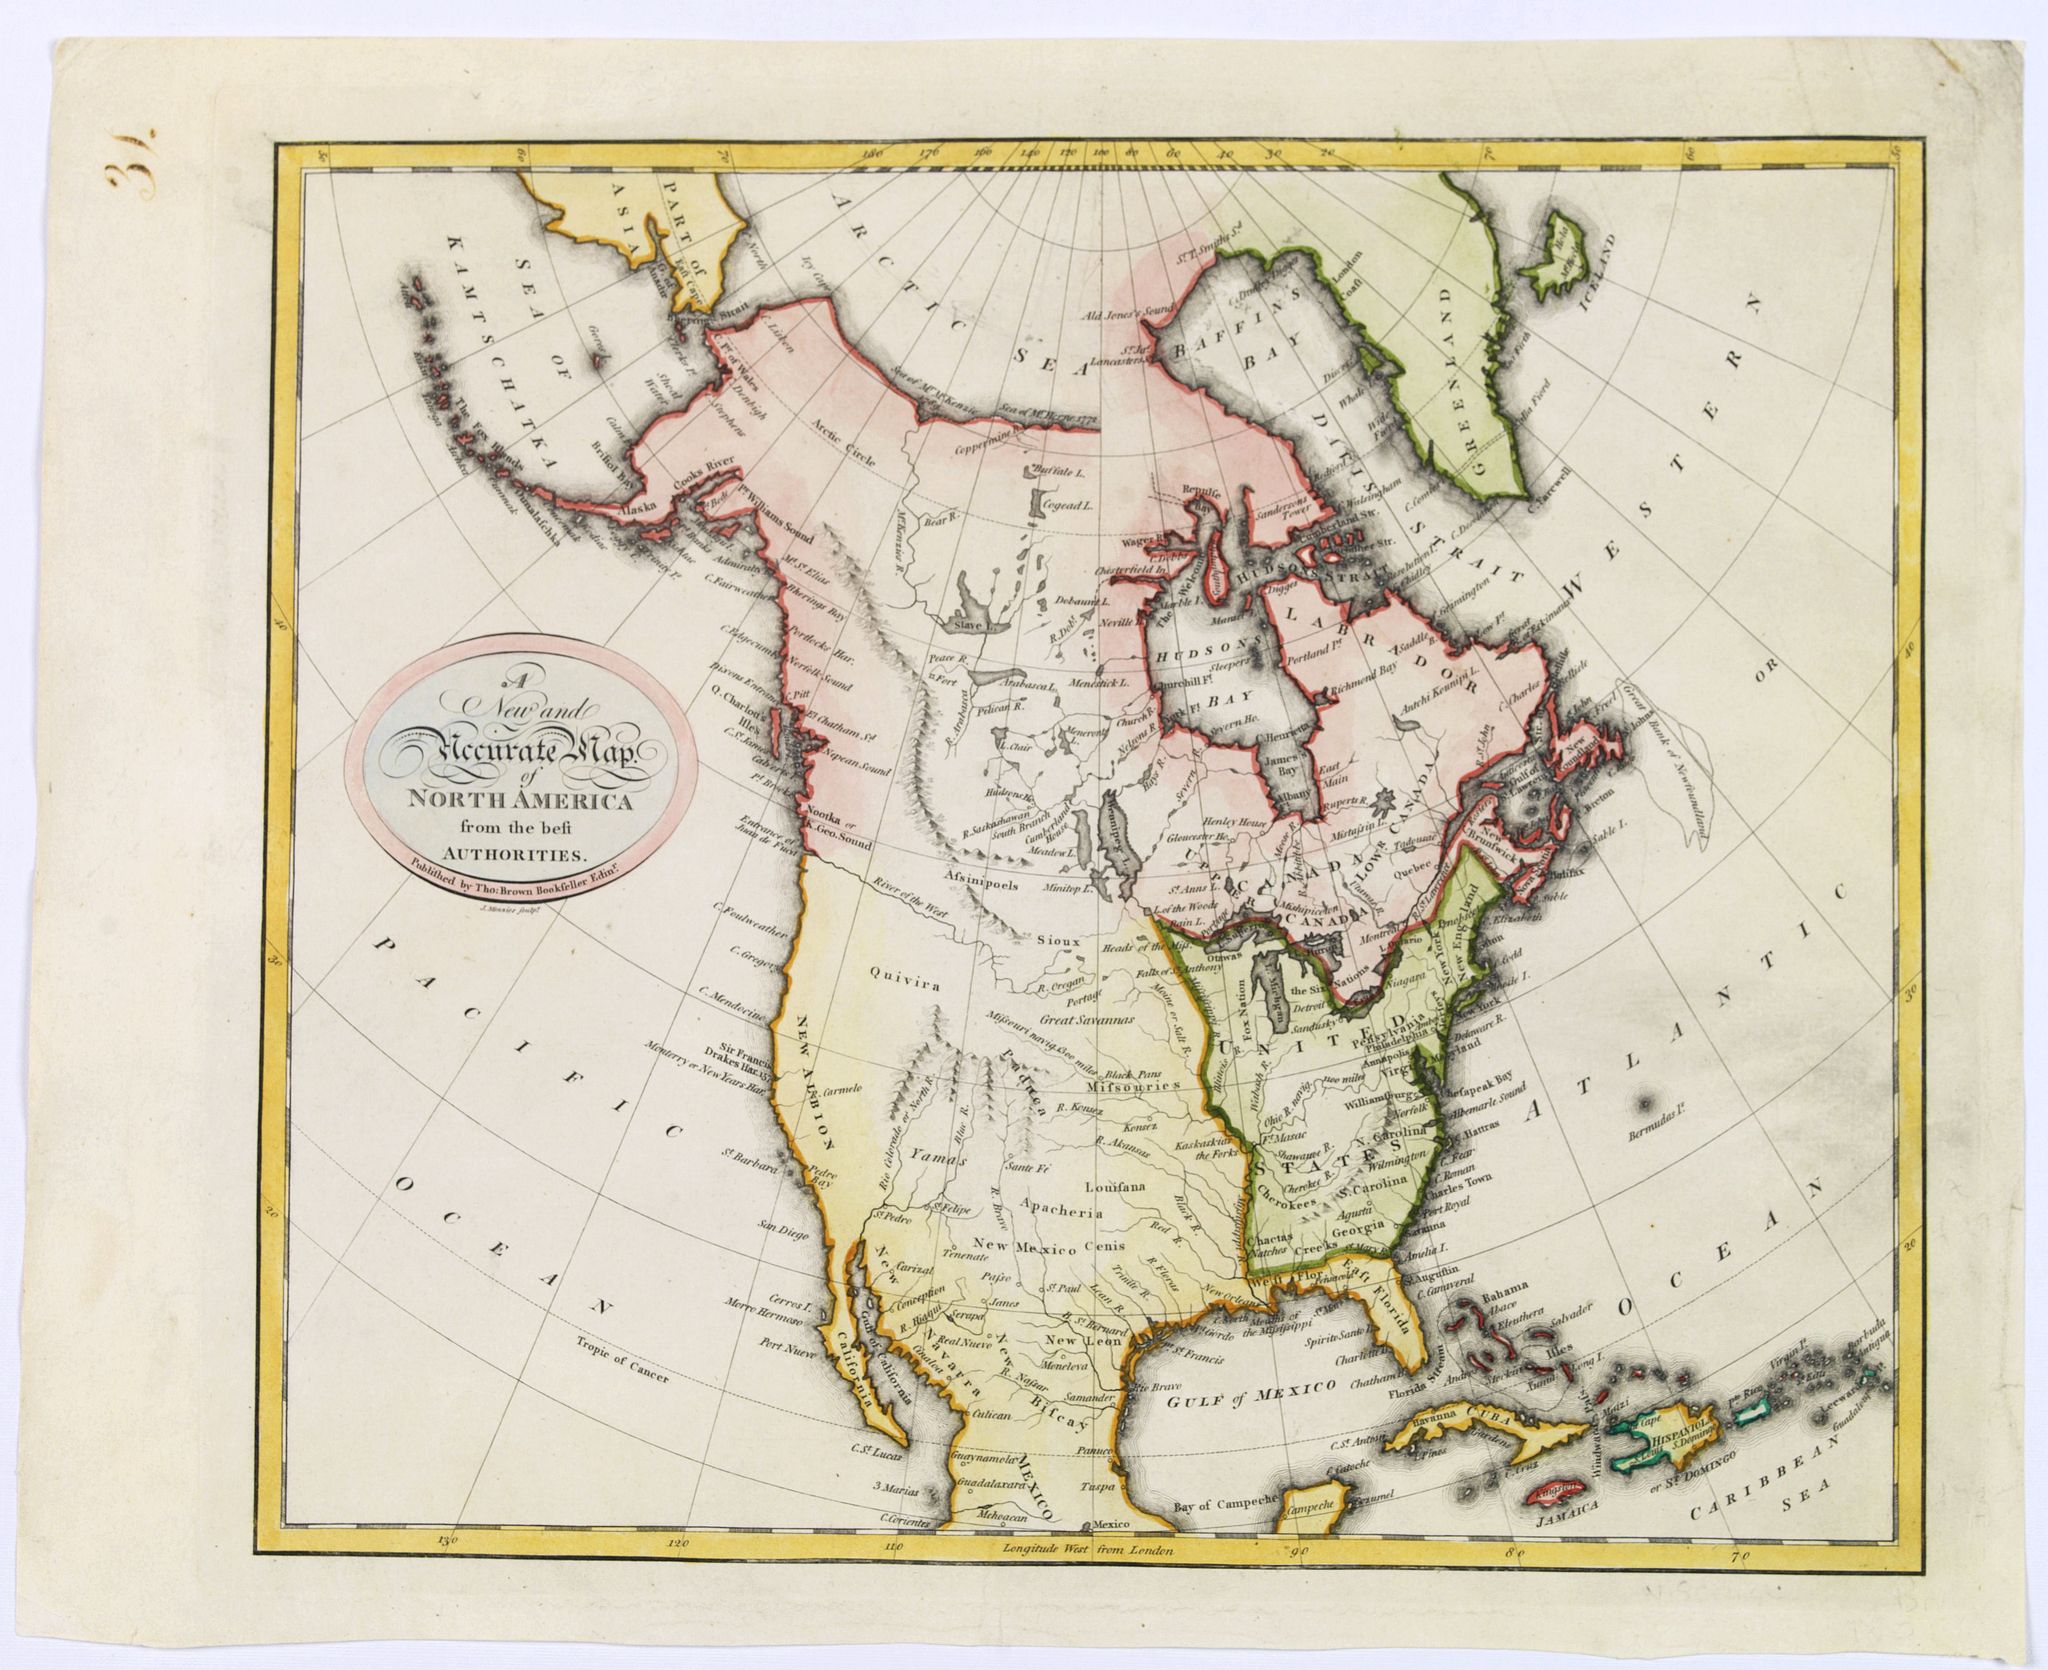 A New and Accurate Map of North America from the best Authorities.